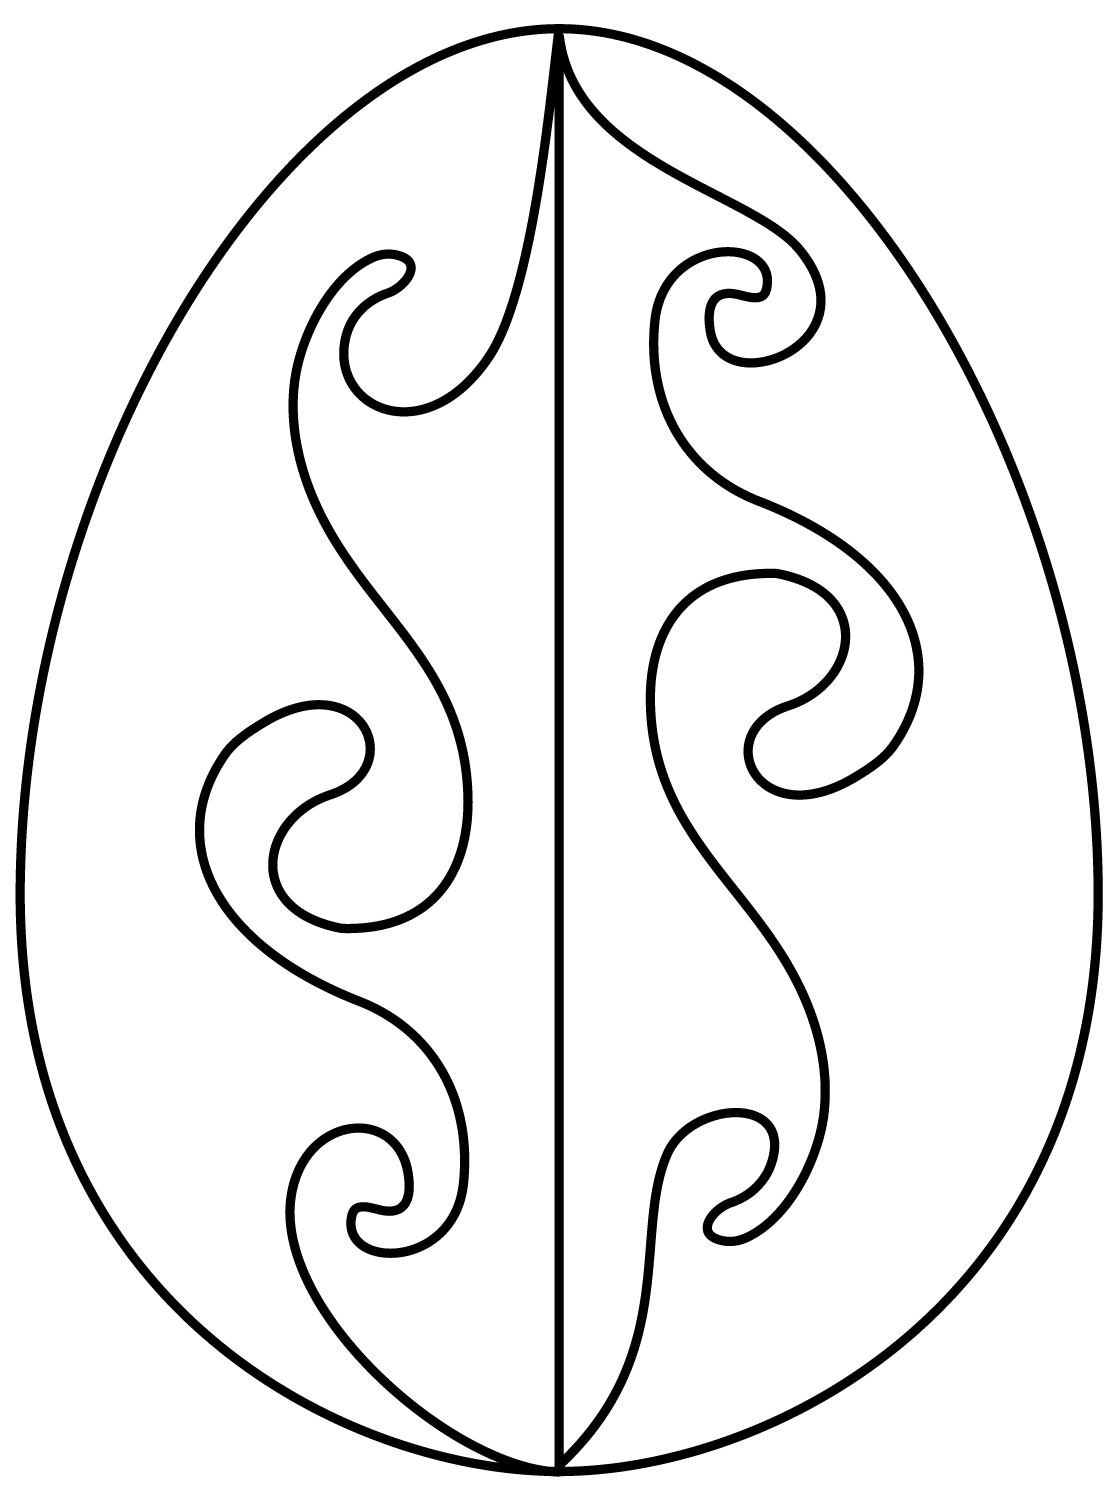 Easter Egg With Waves Pattern Coloring Page